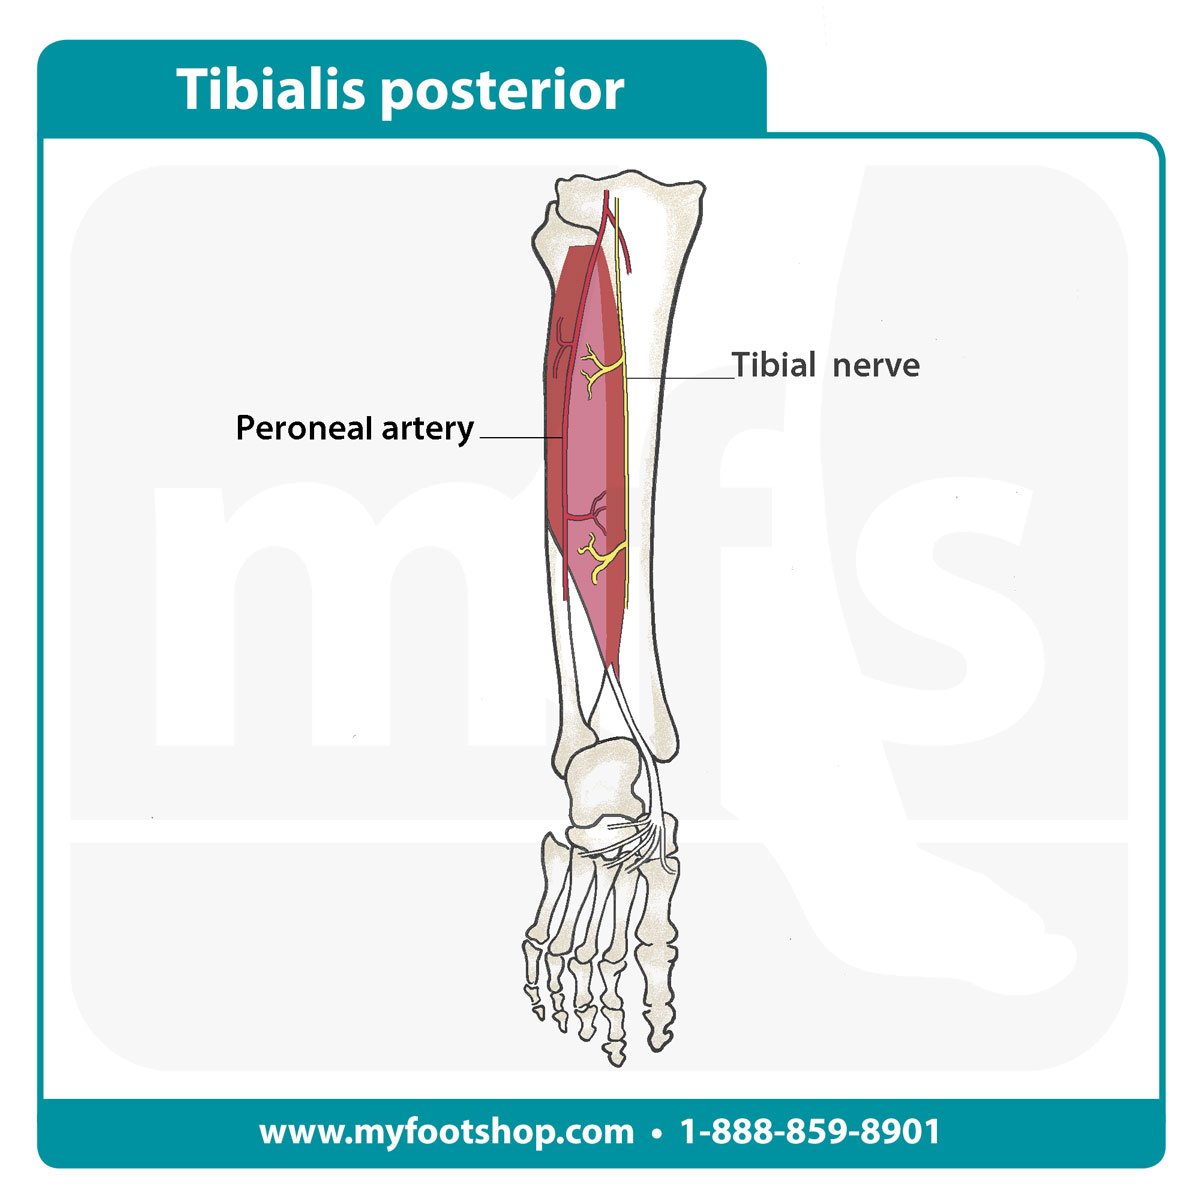 Image of the tibialis posterior muscle and tendon